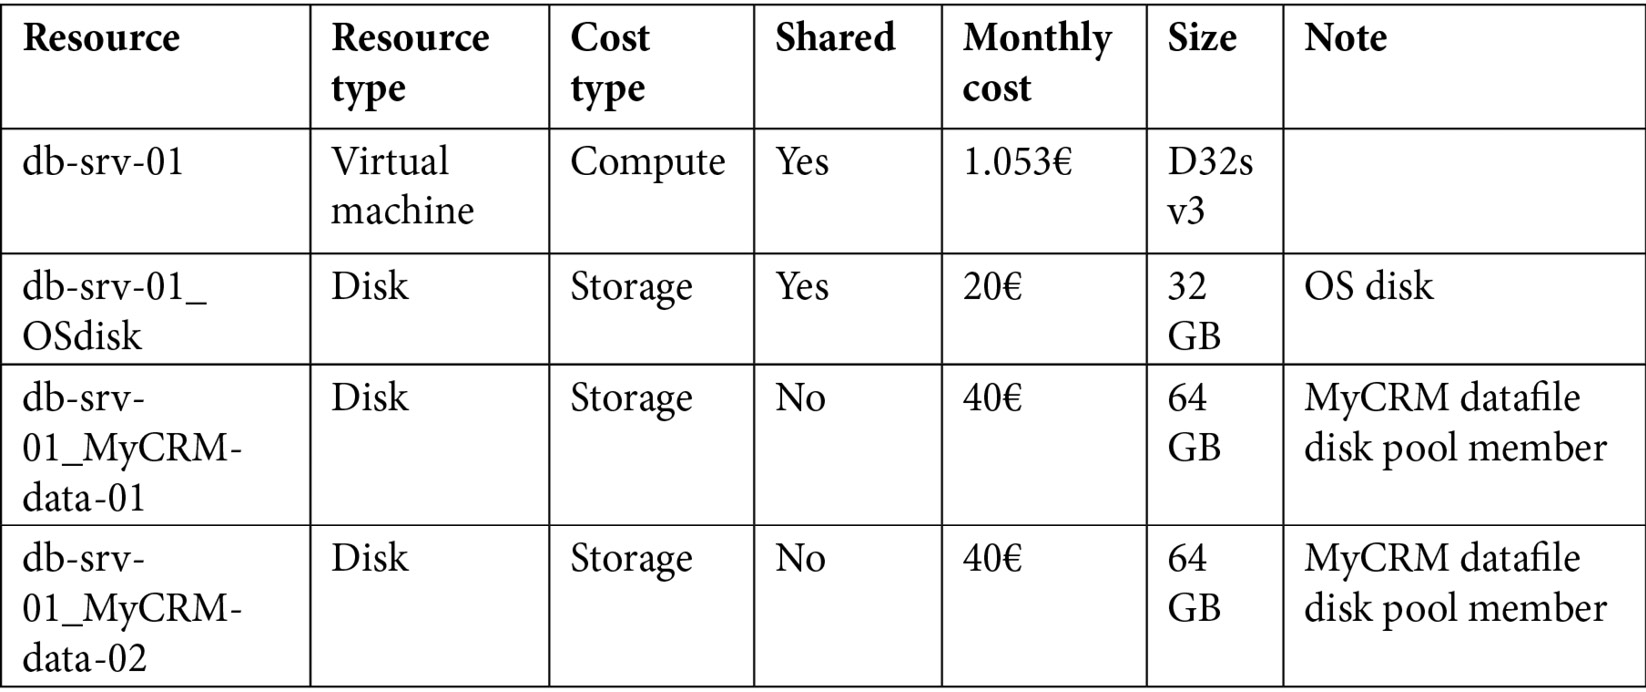 Tablet 5.9 – Sample costs for databases and VMs
